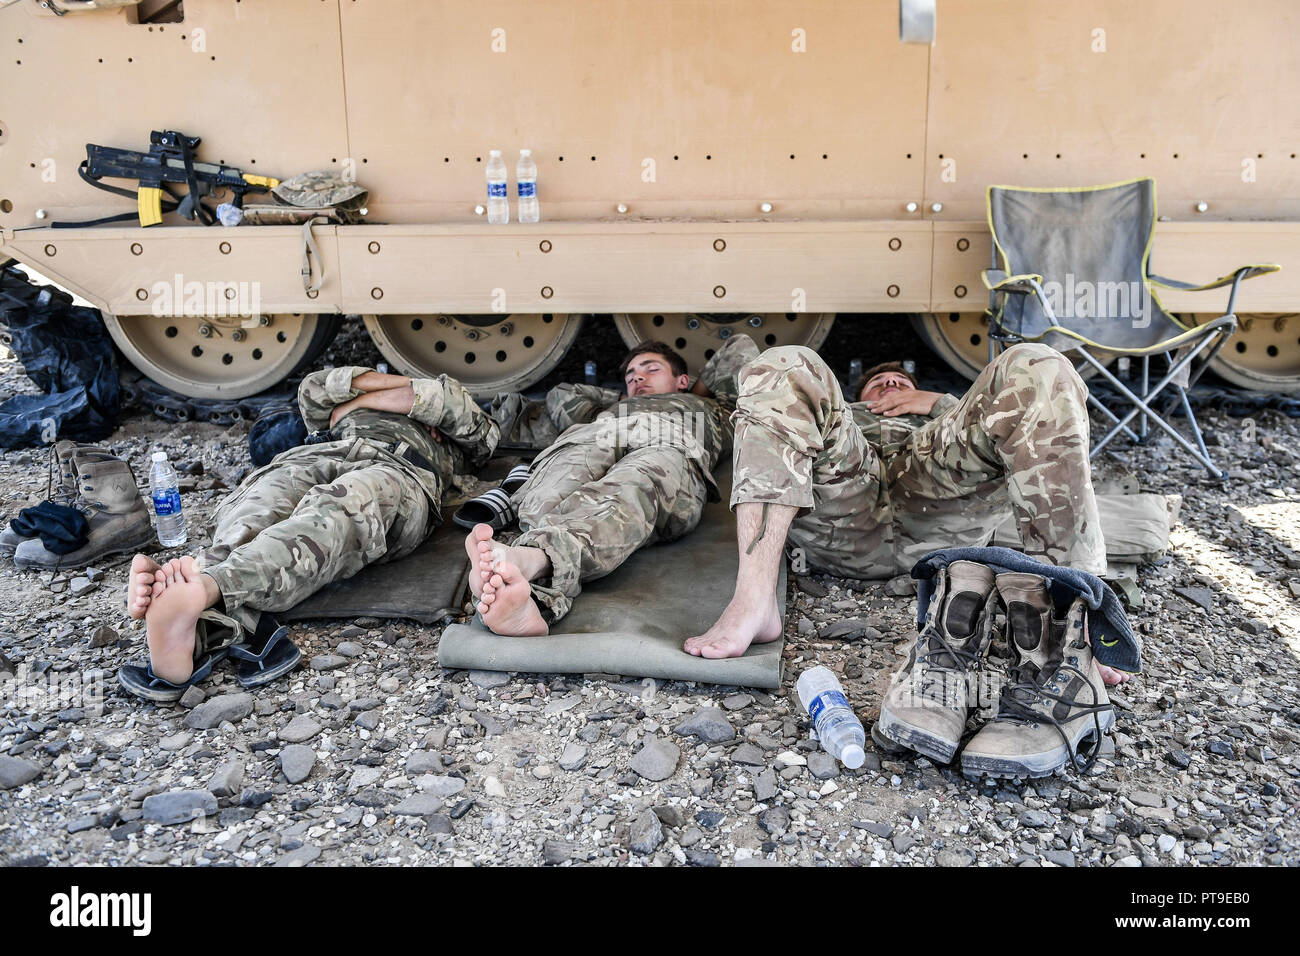 British soldiers remove their boots during a pause in manoeuvres in the searing heat of the Oman desert, where UK forces are taking part in a month-long exercise, Saif Sareea 3. Stock Photo